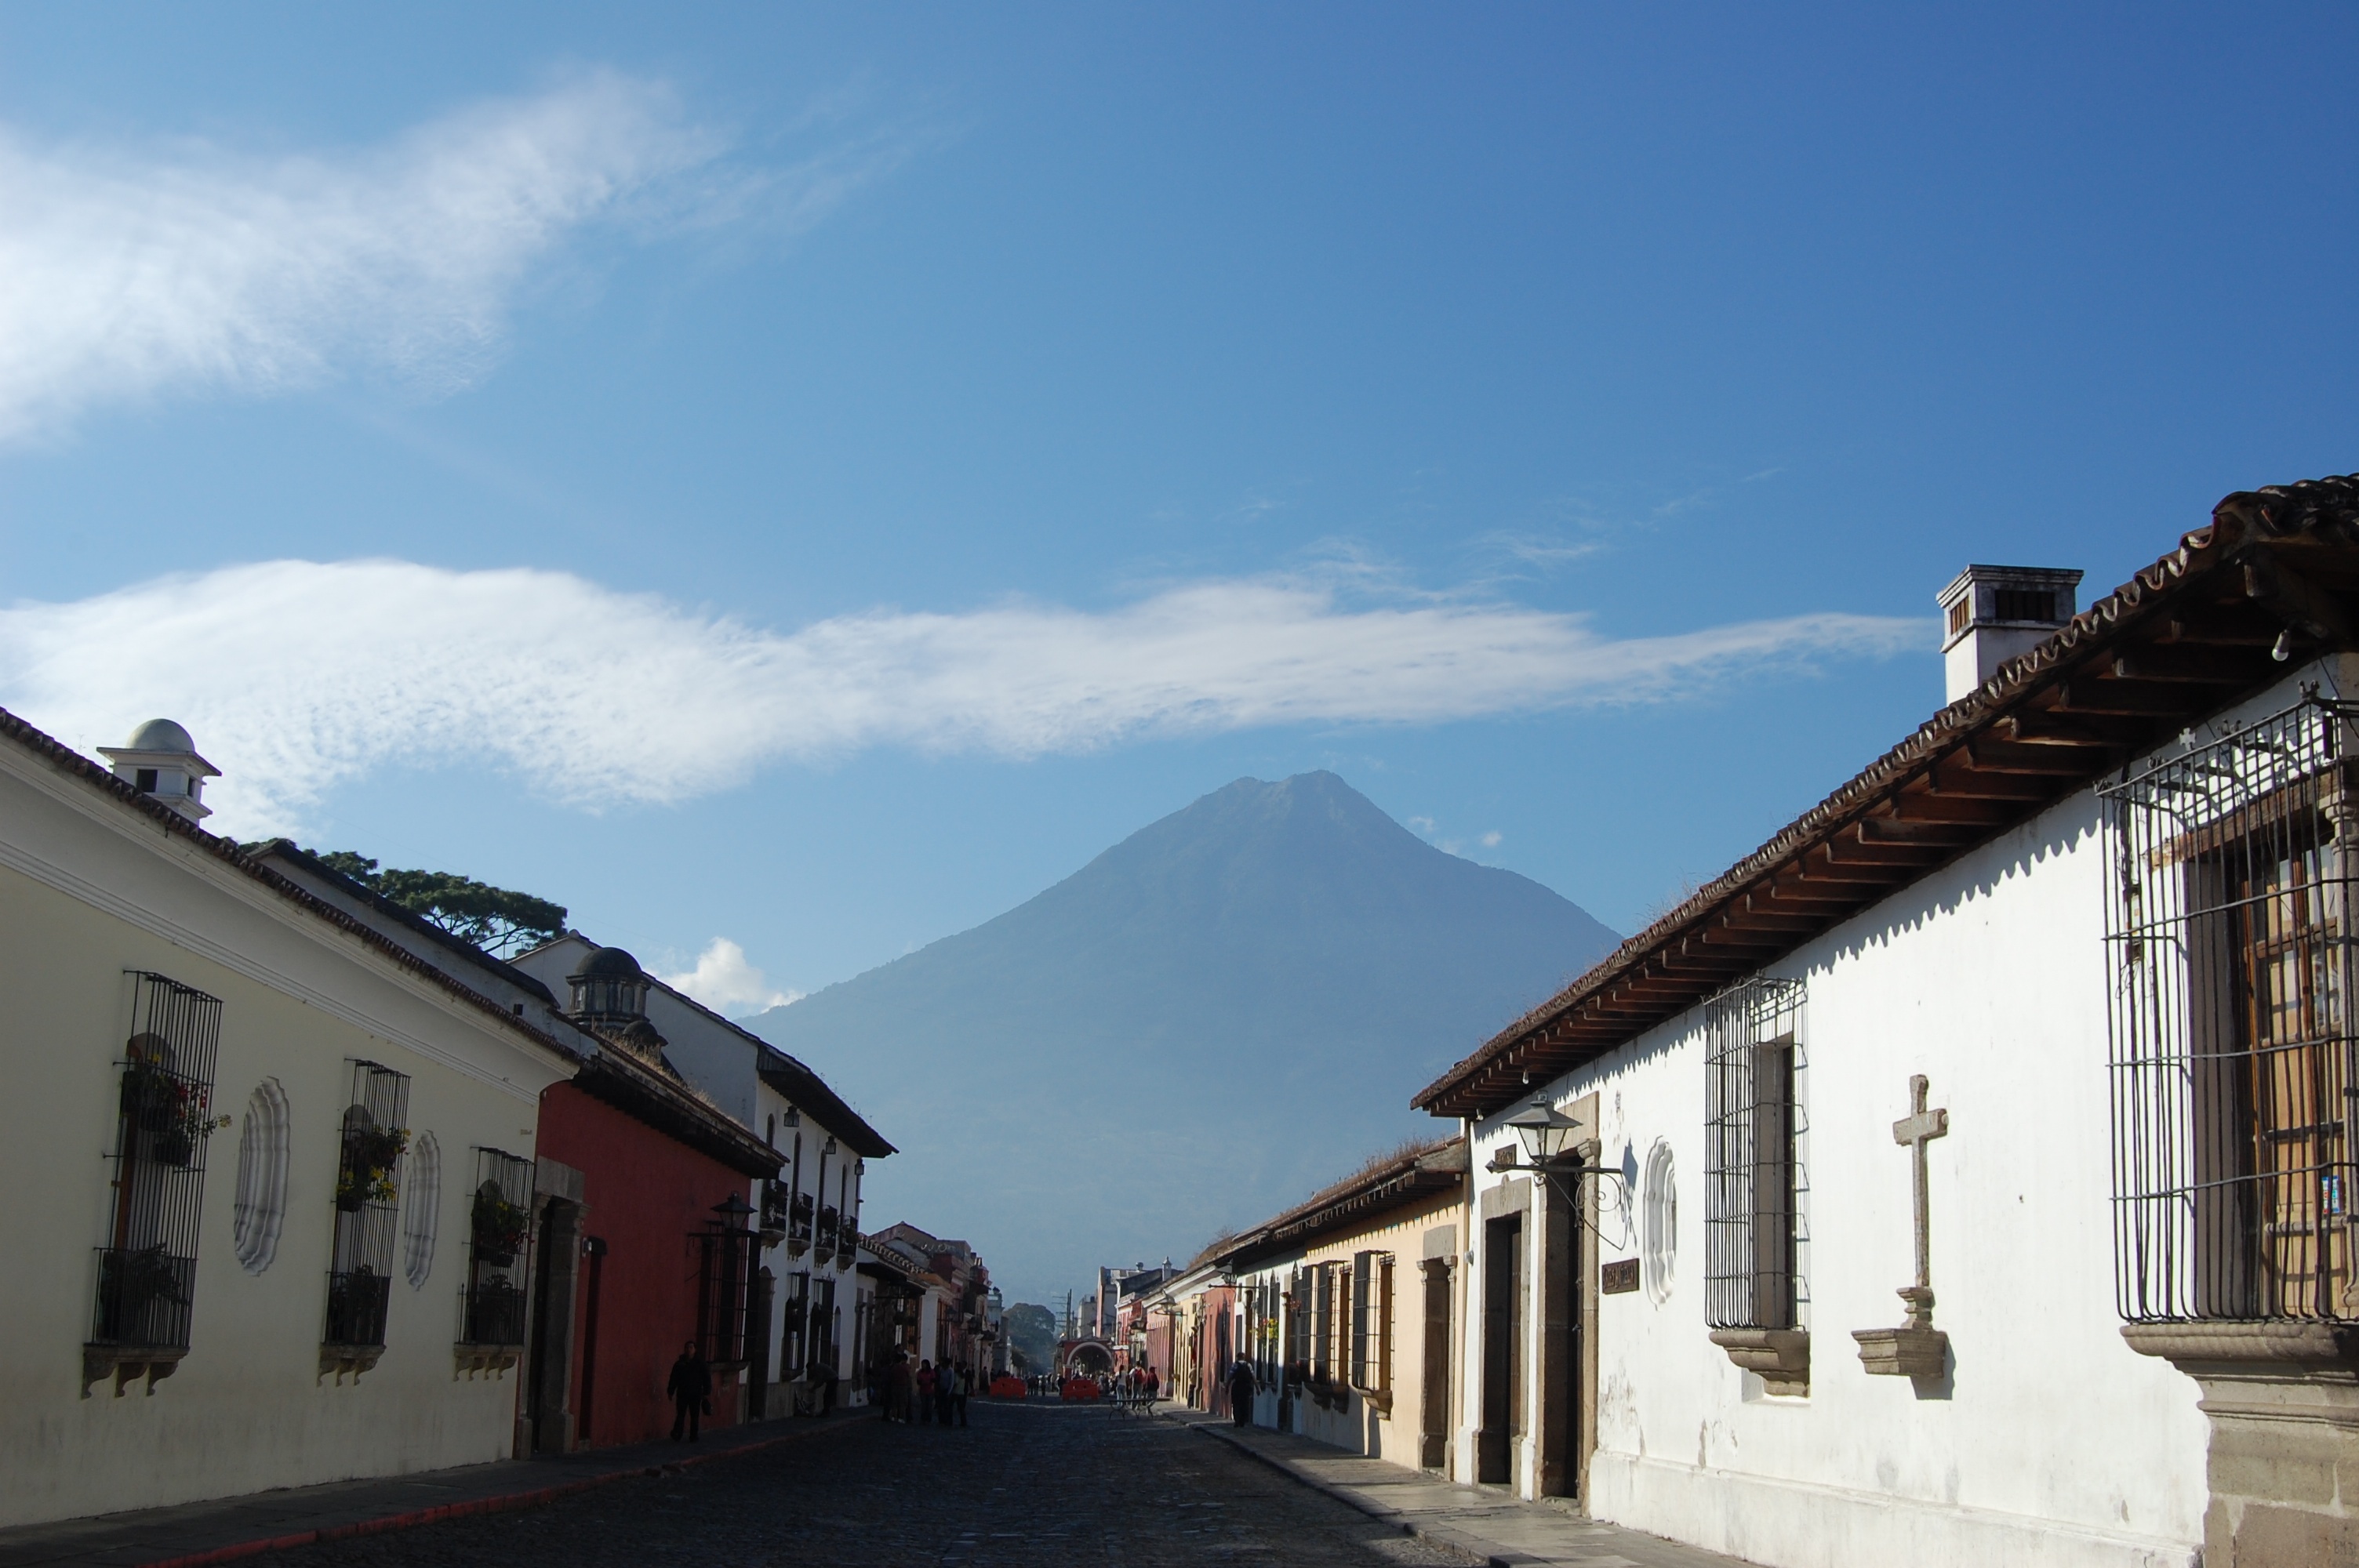 Street with beautiful Spanish colonial architecture and volcano looming in the distance.